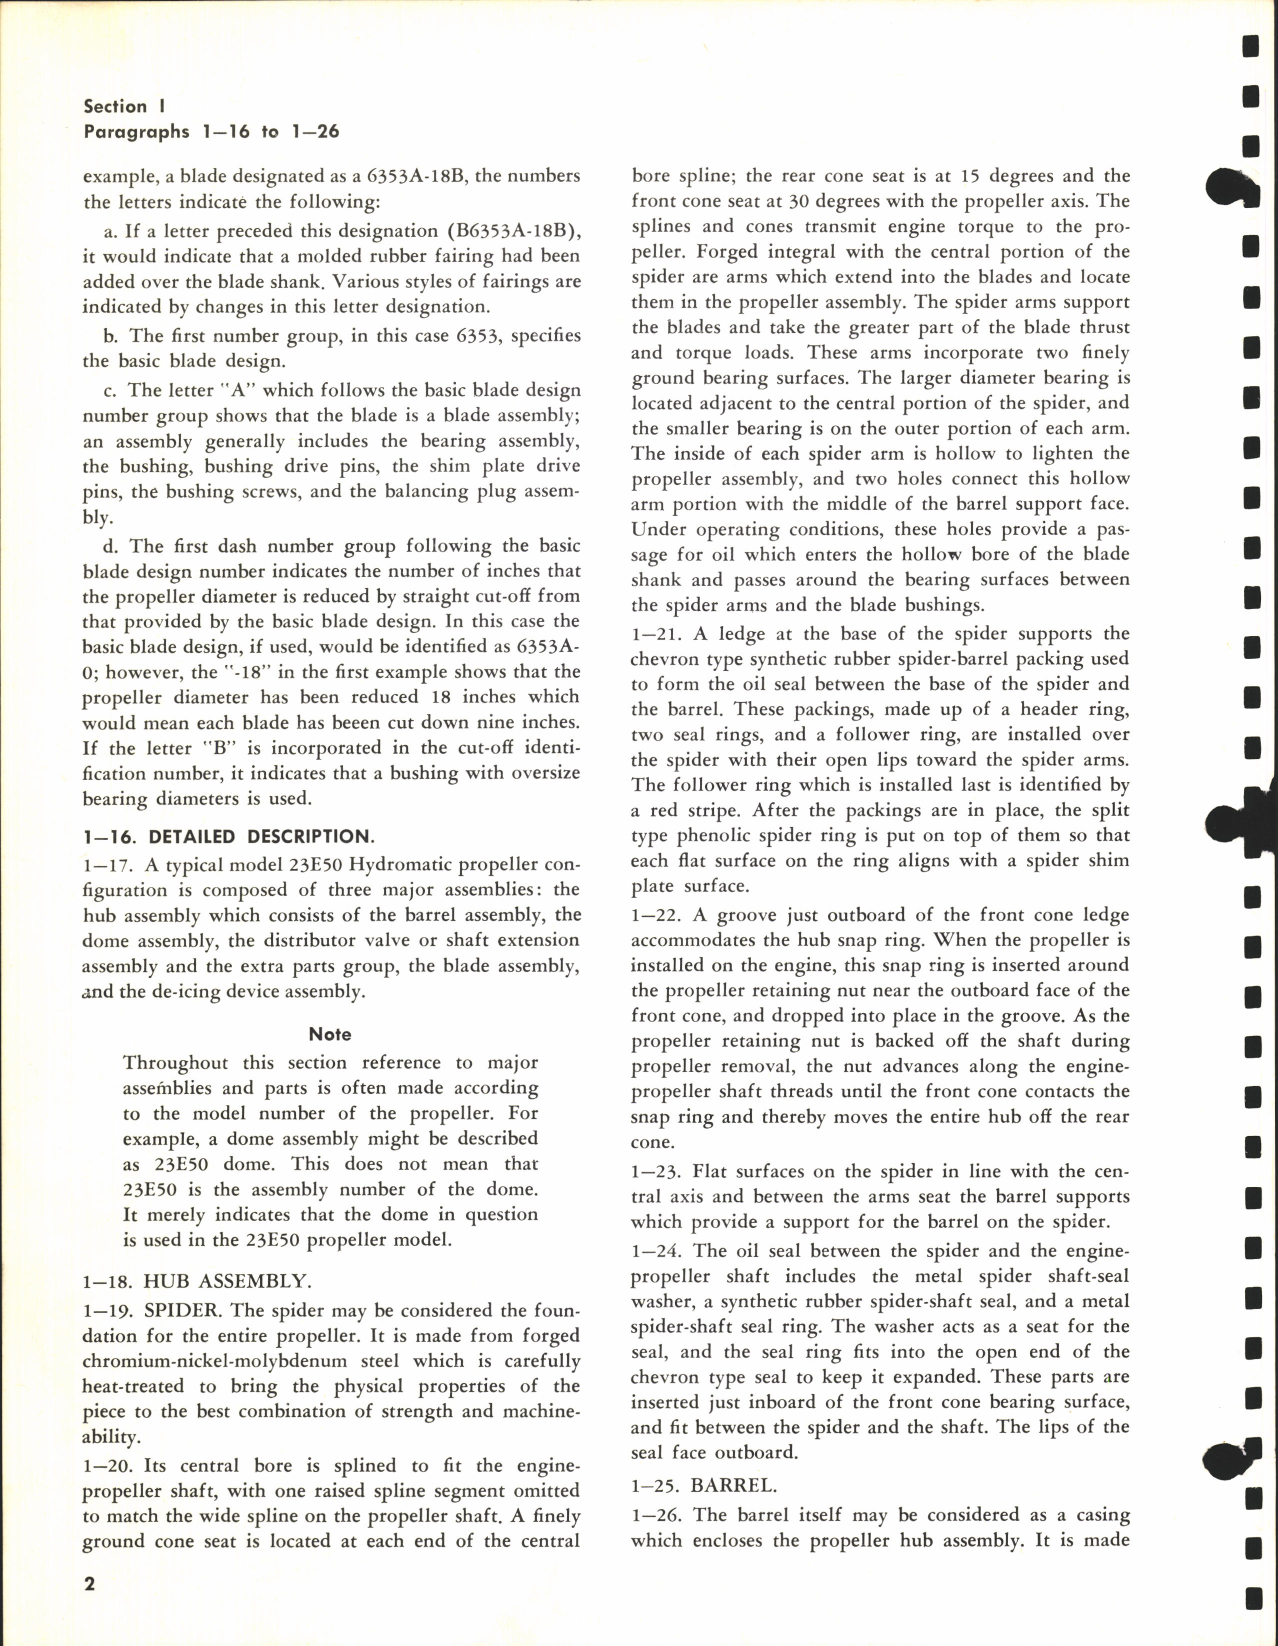 Sample page 8 from AirCorps Library document: Overhaul Manual for Hydromatic Propeller Models 23E50, 23D40, 24D50, 33D50, and 33E60